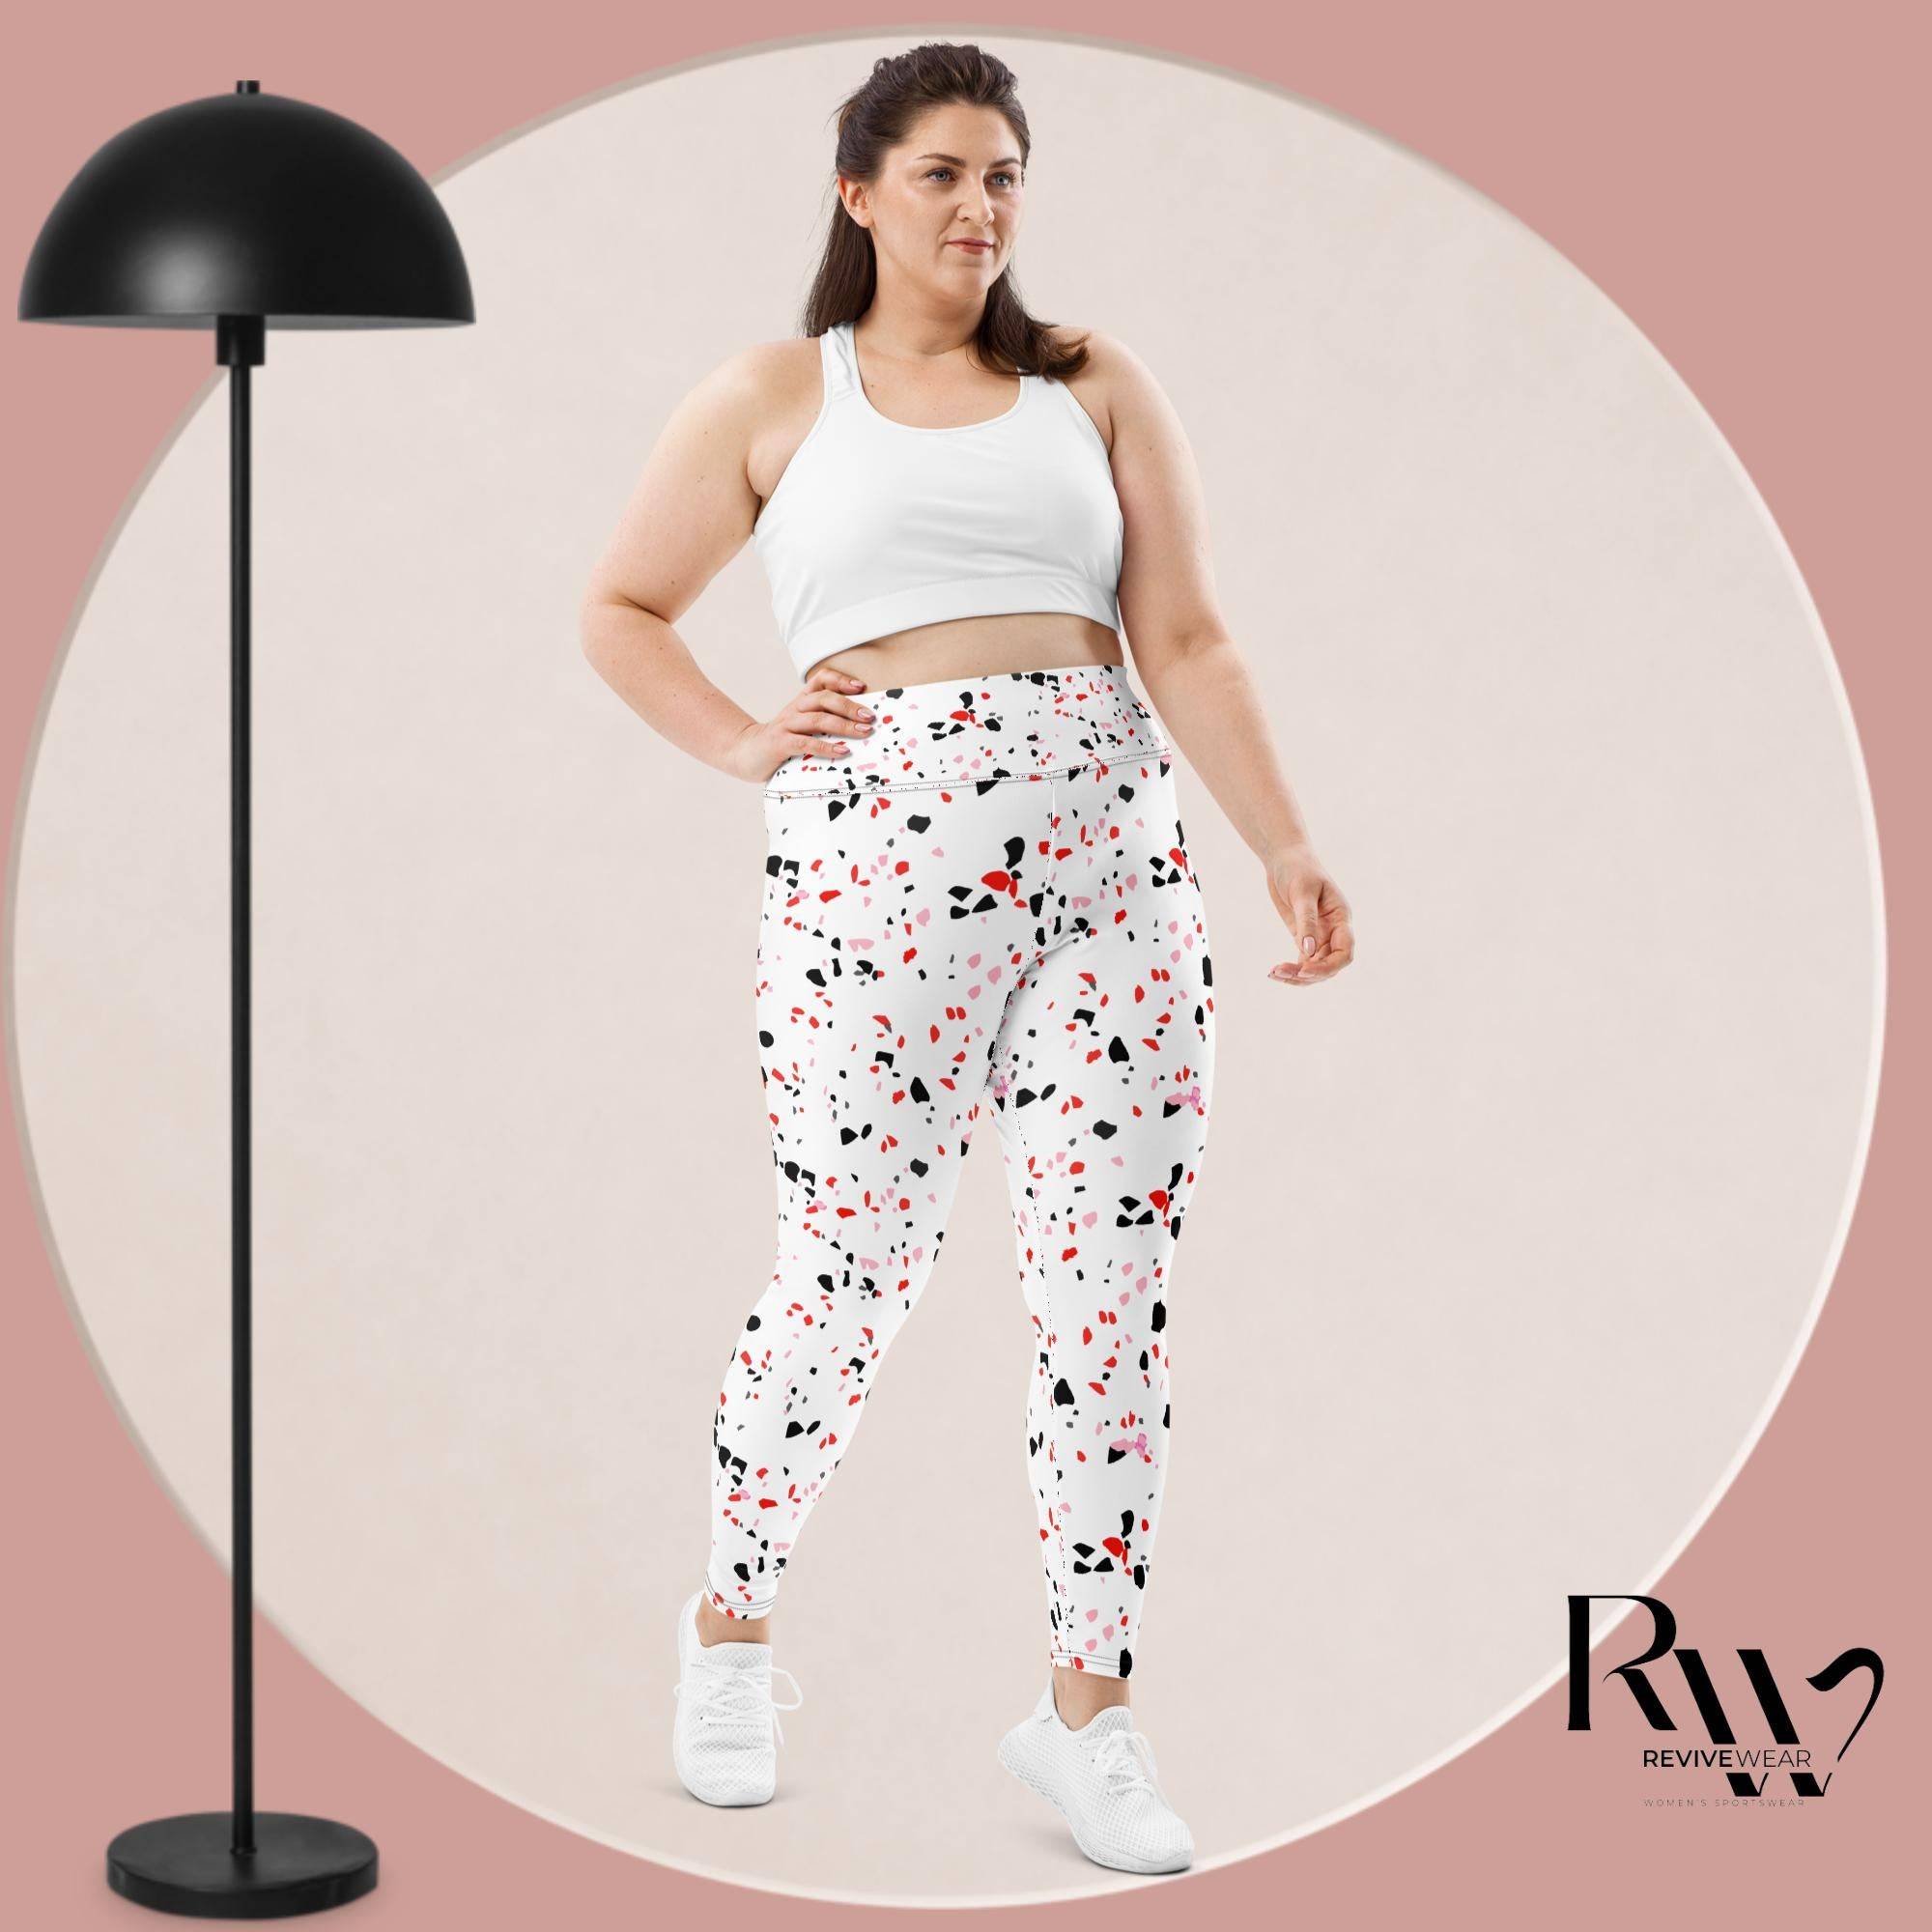 Radiant Leggings Plus Size High Waist Leggings - Revive Wear     Radiant Leggings Plus Size.  30-day returns. Supportive and flattering feel. Order now at Revive Wear.